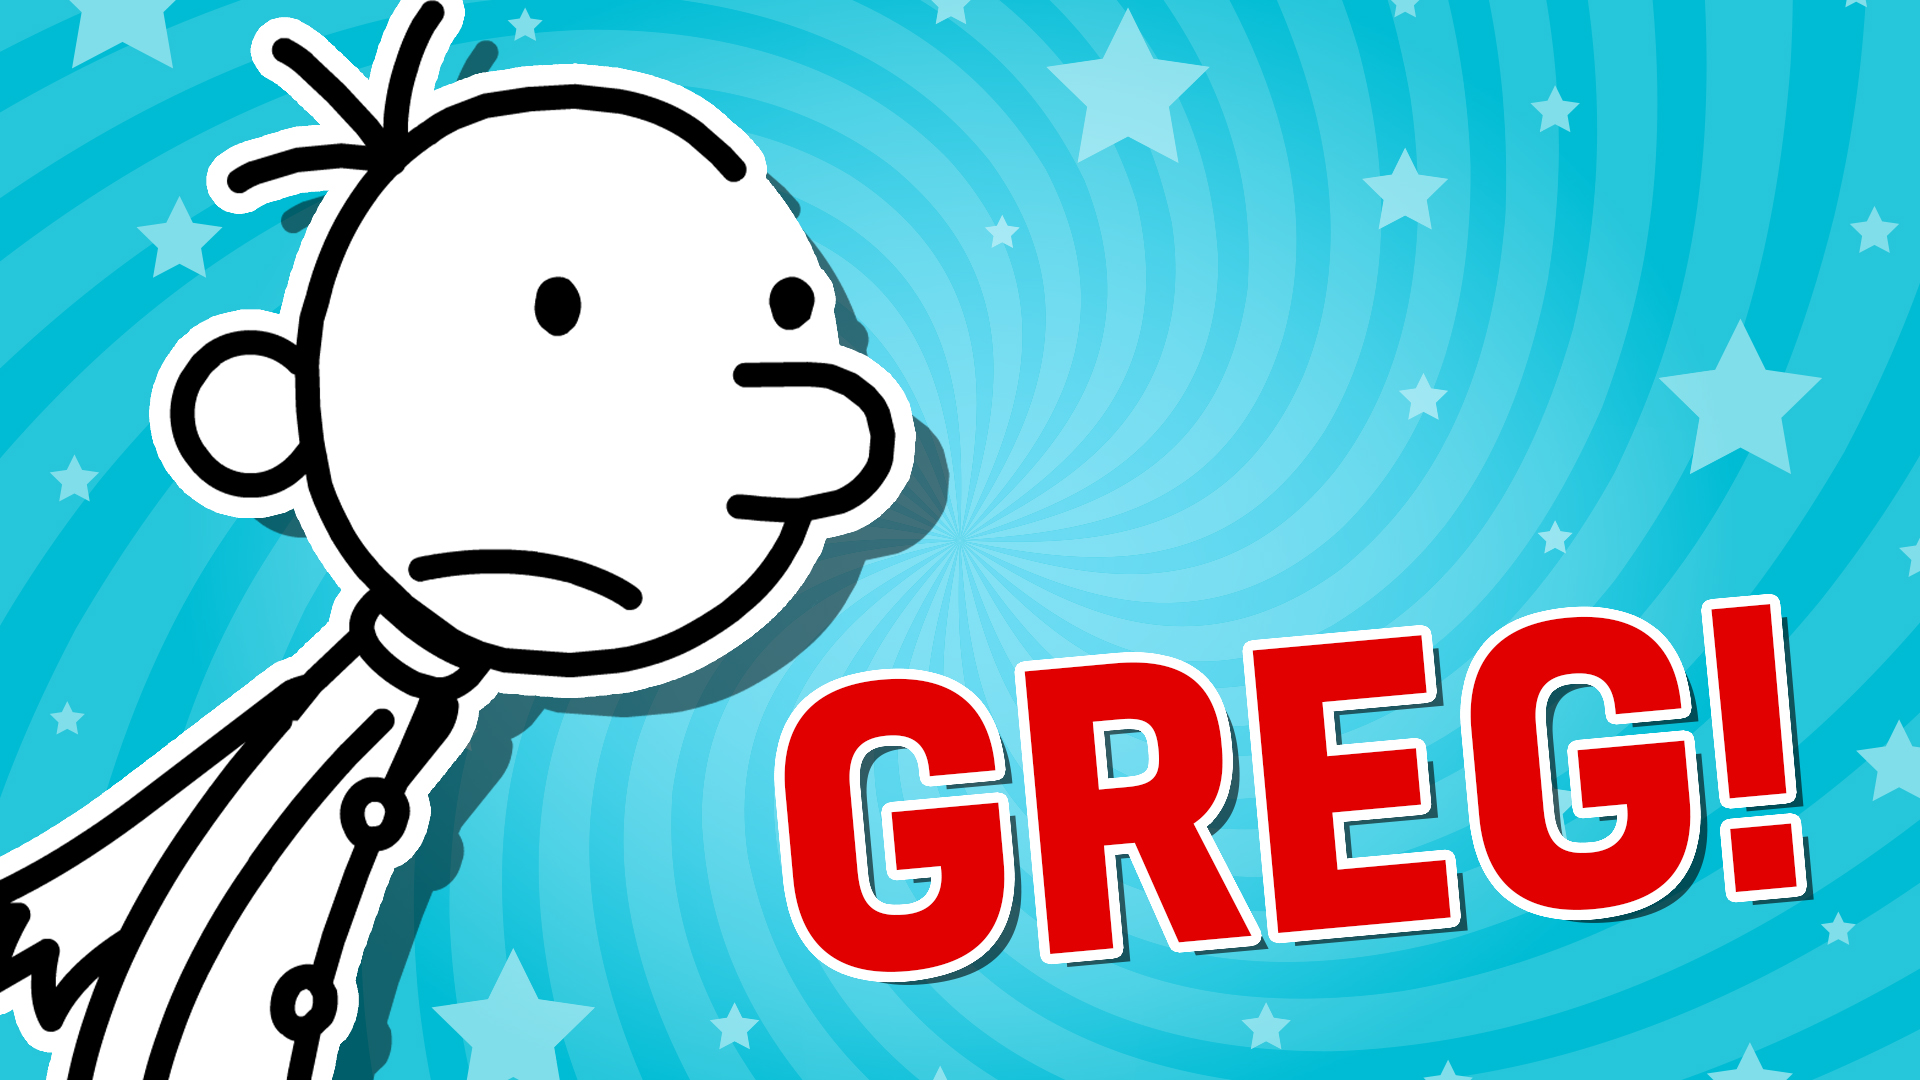 Which Diary Of A Wimpy Kid Character Are You? - ProProfs Quiz